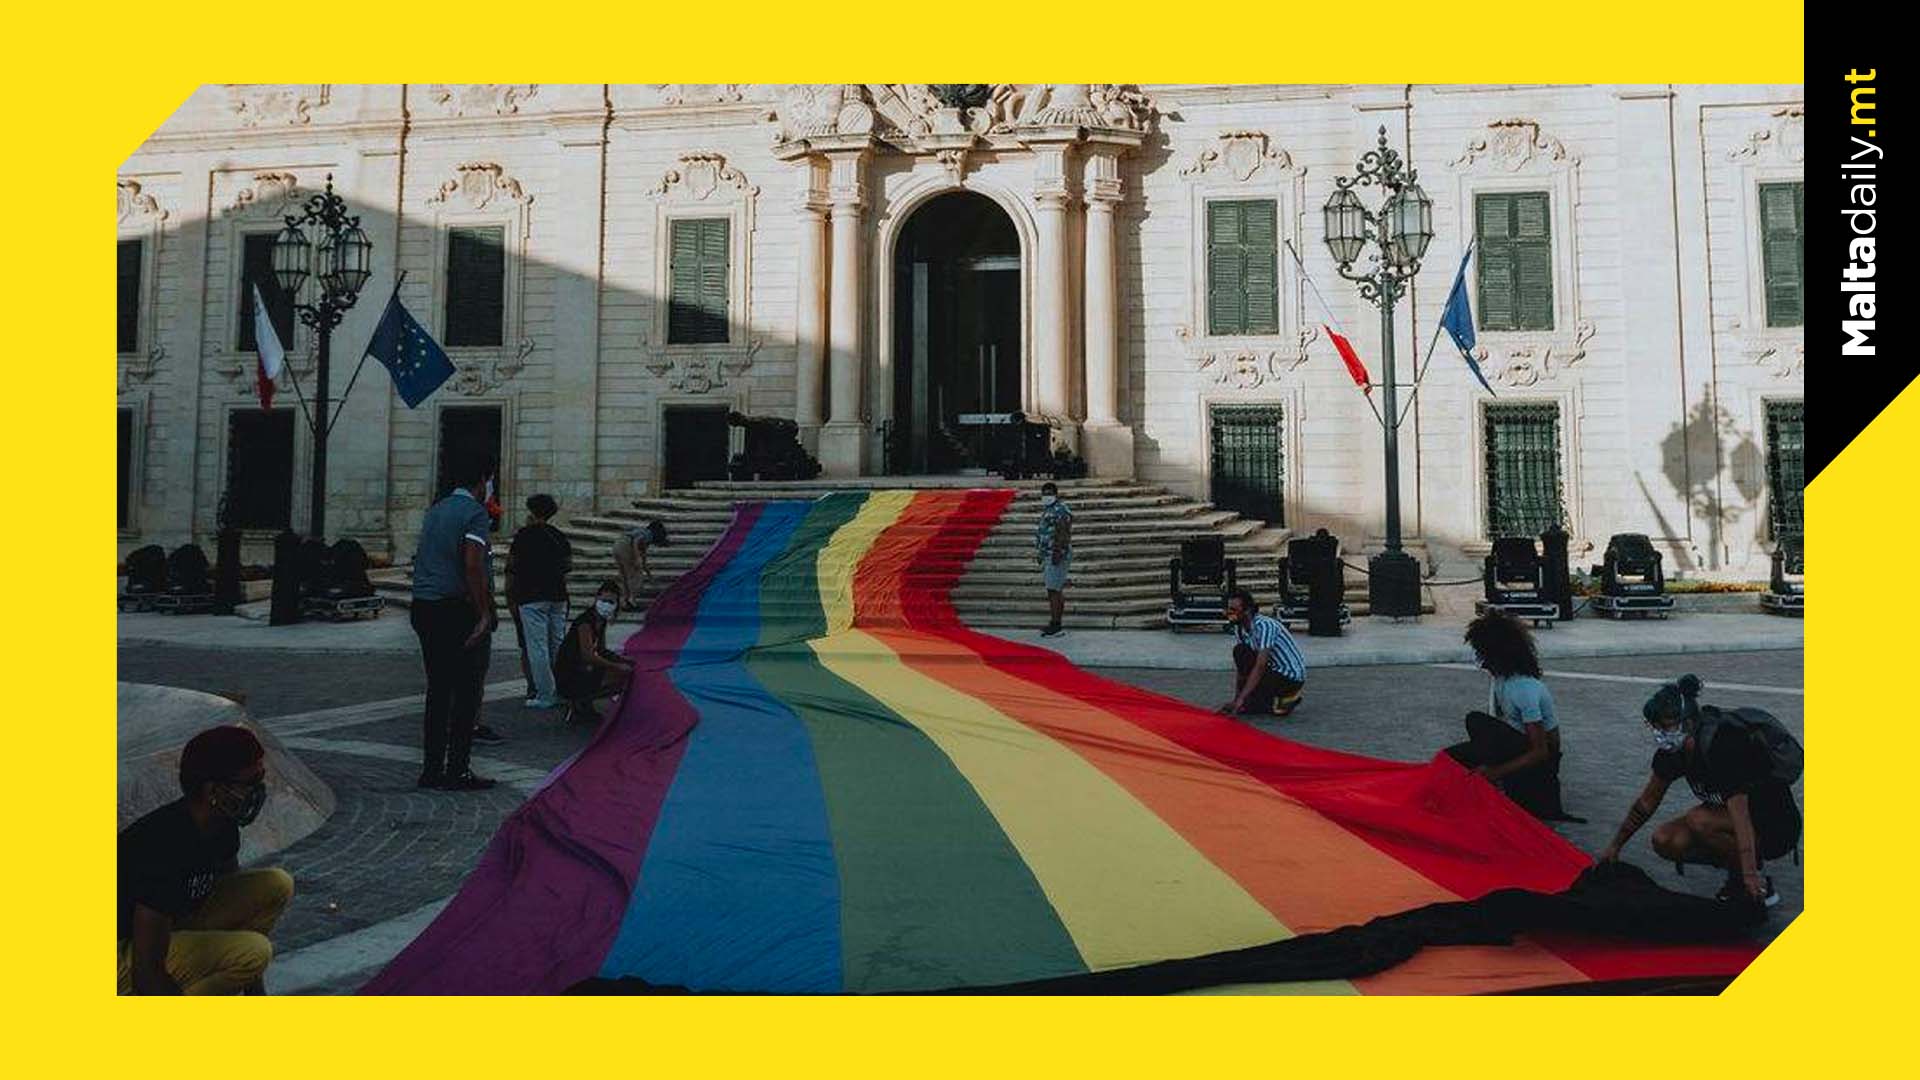 43.7% Of Queer People In Malta Feel Unsafe Shows Survey